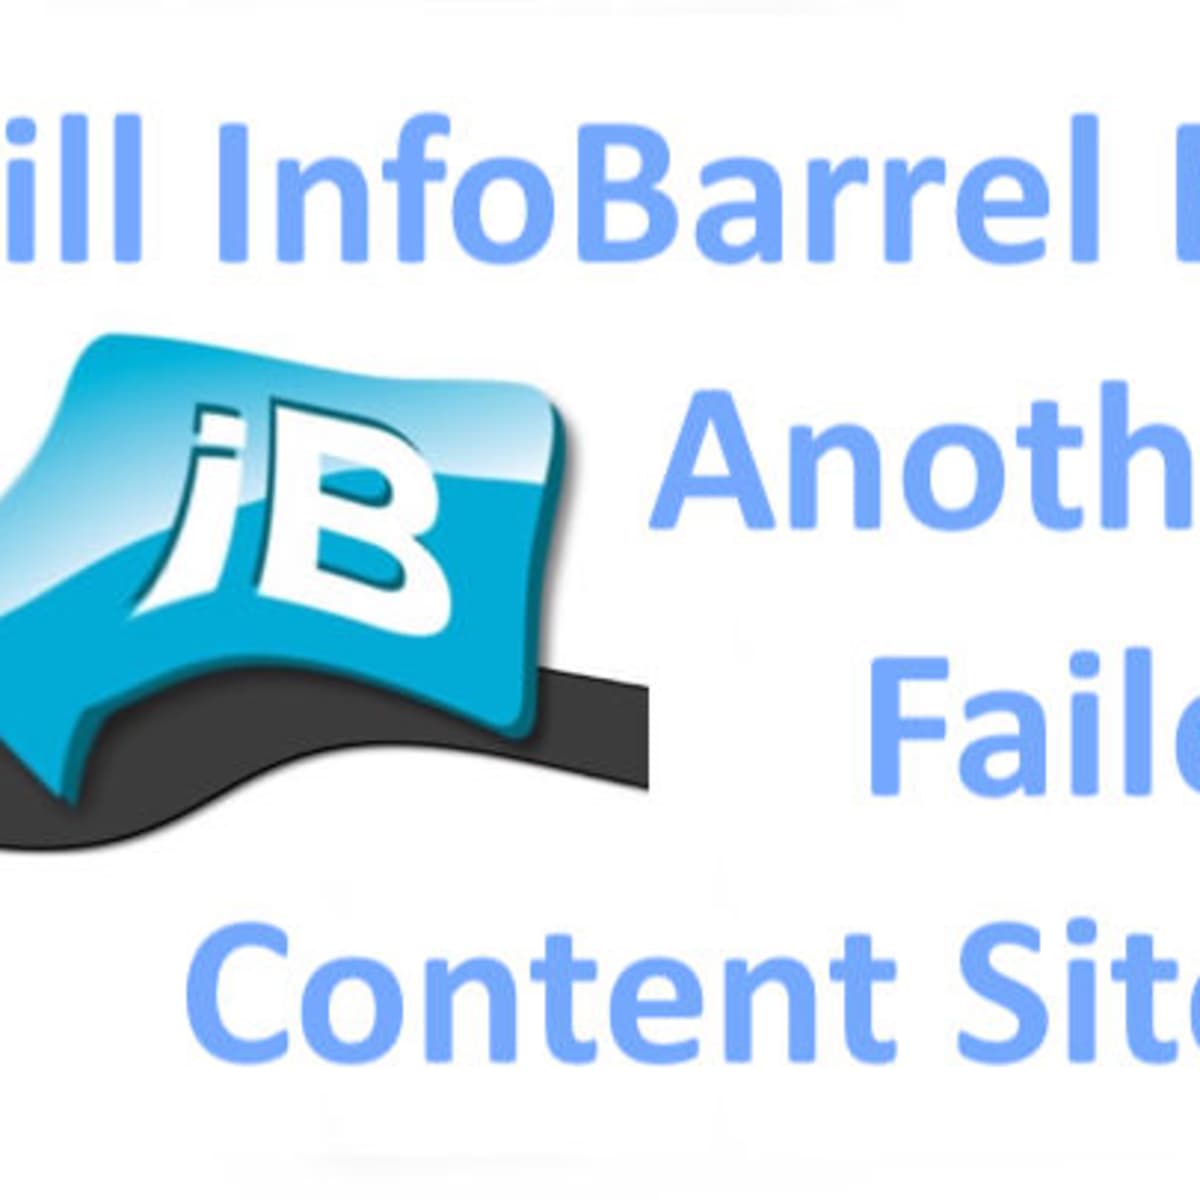 Will Infobarrel Be Another Failed Content Site Toughnickel